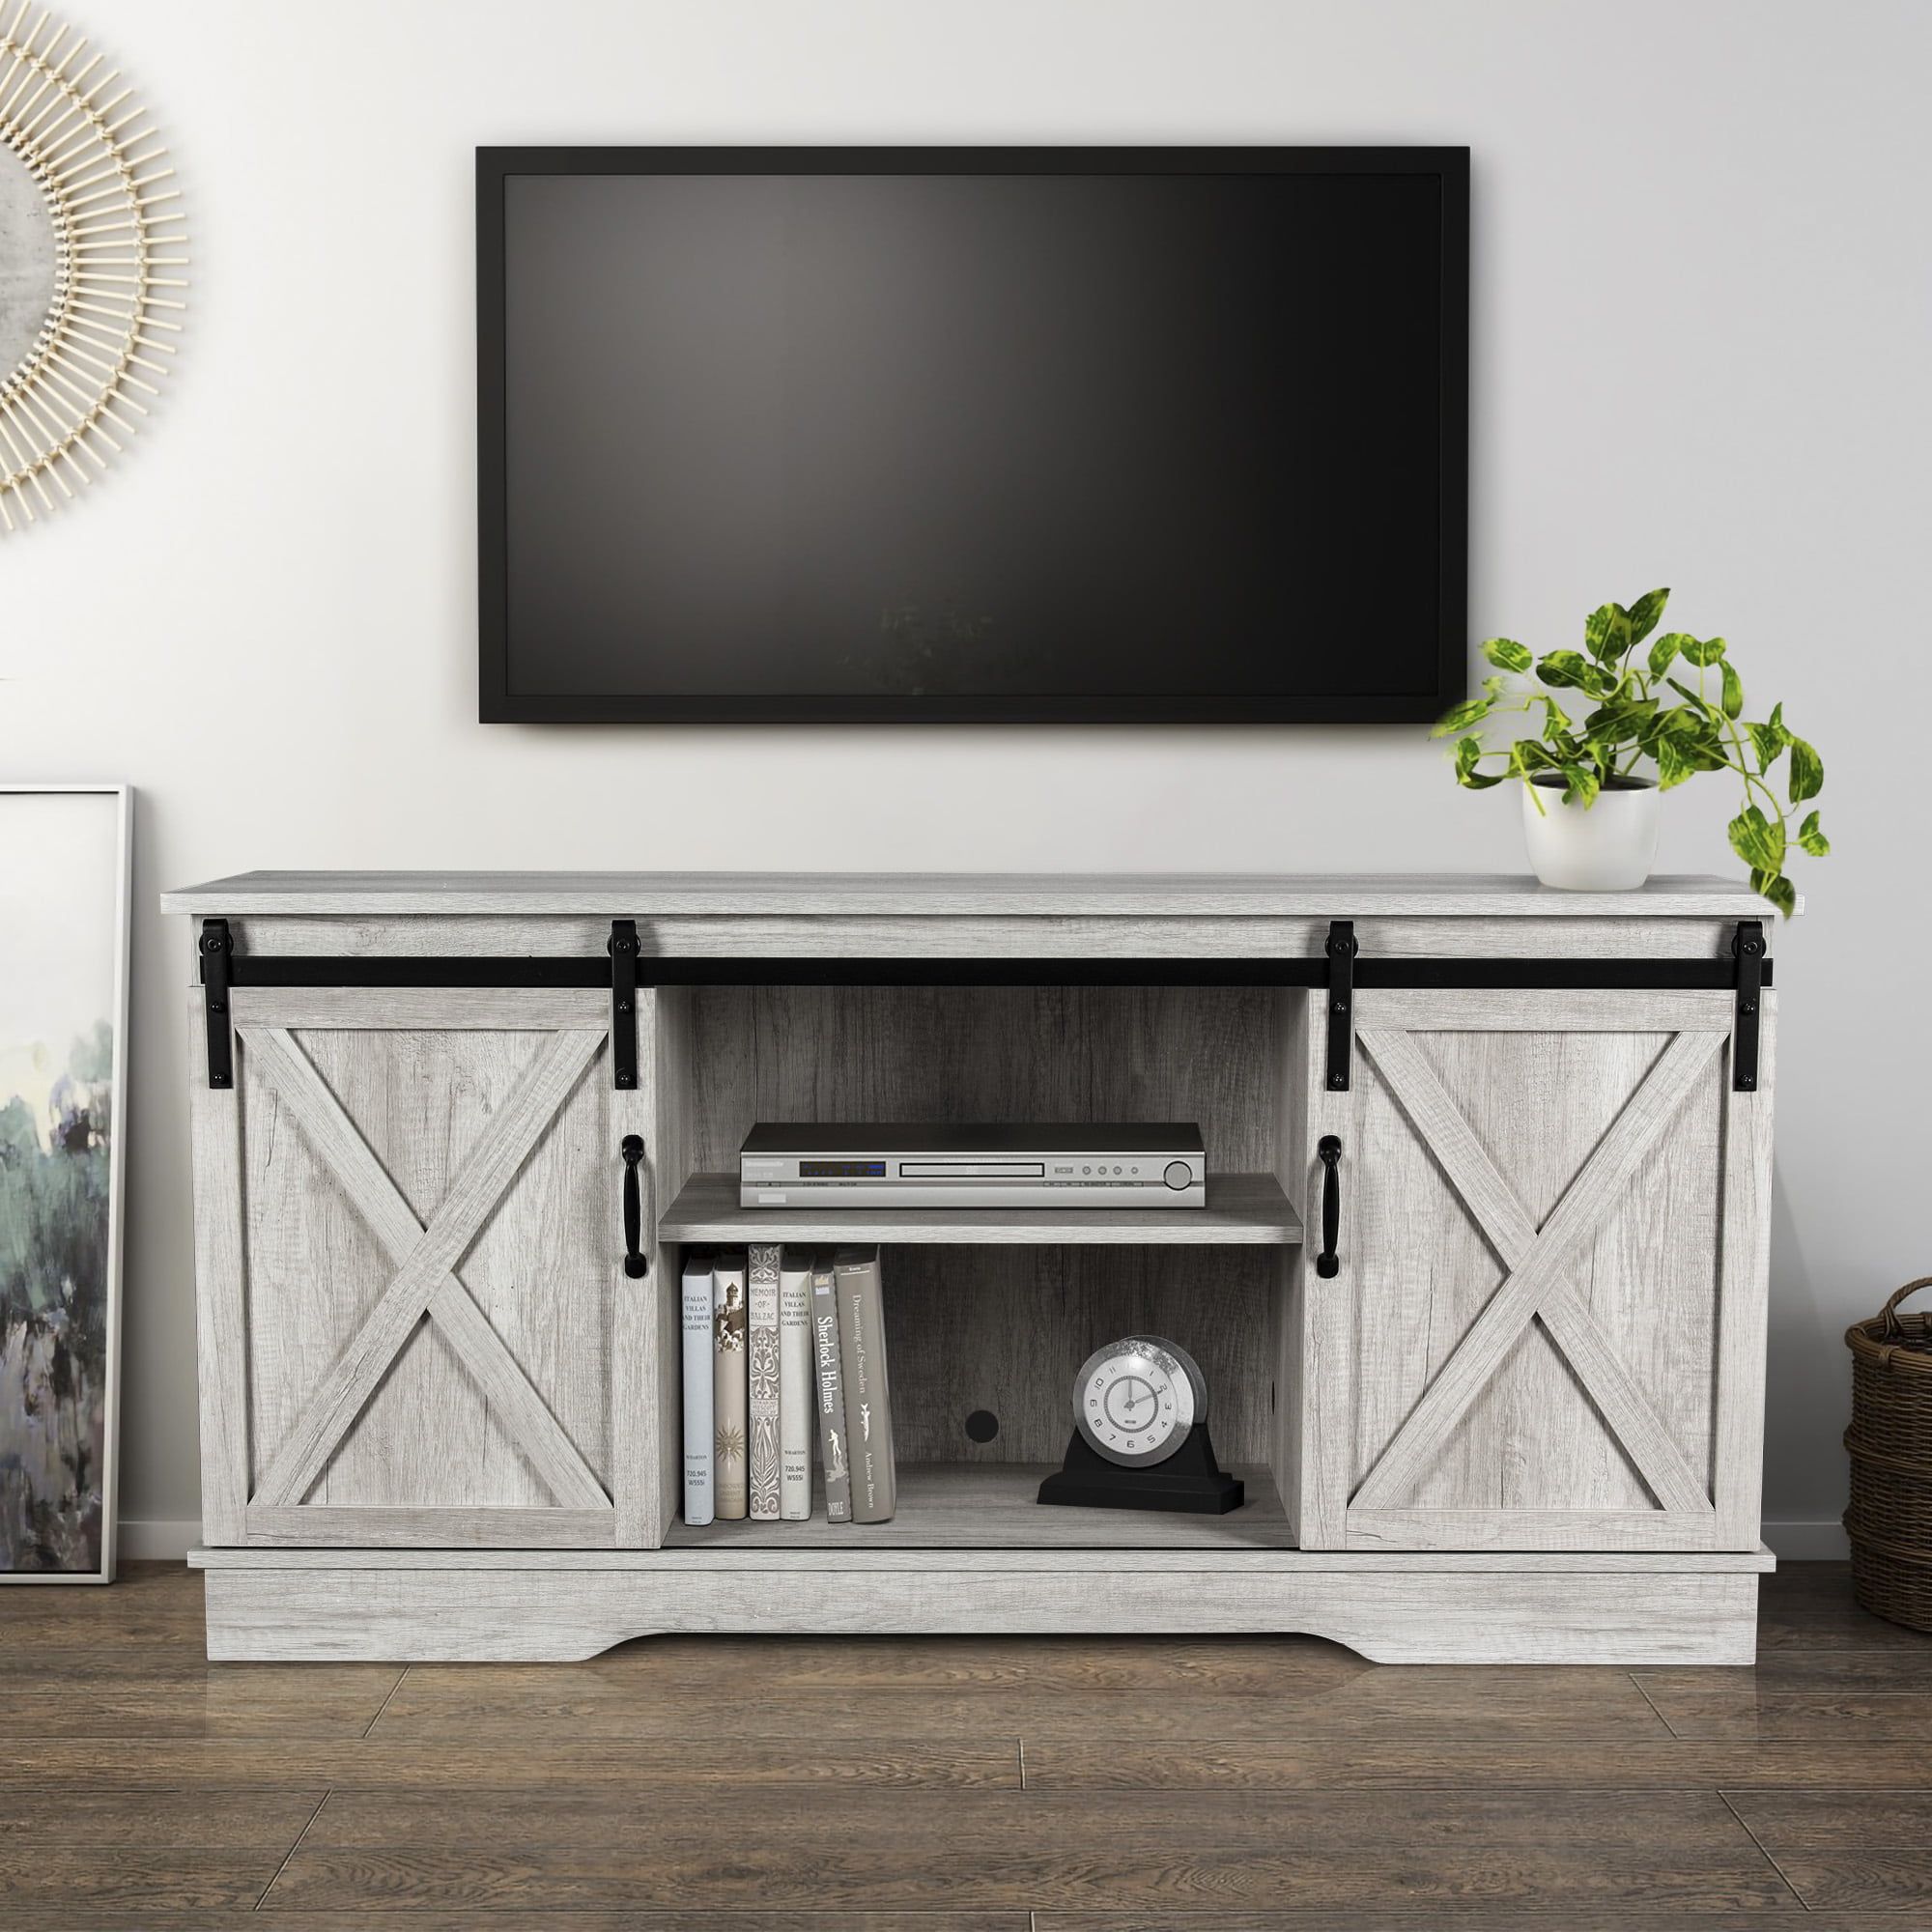 Belleze Modern Farmhouse Style 58 Inch Tv Stand With Sliding Barn Door Within Modern Farmhouse Barn Tv Stands (Gallery 13 of 20)